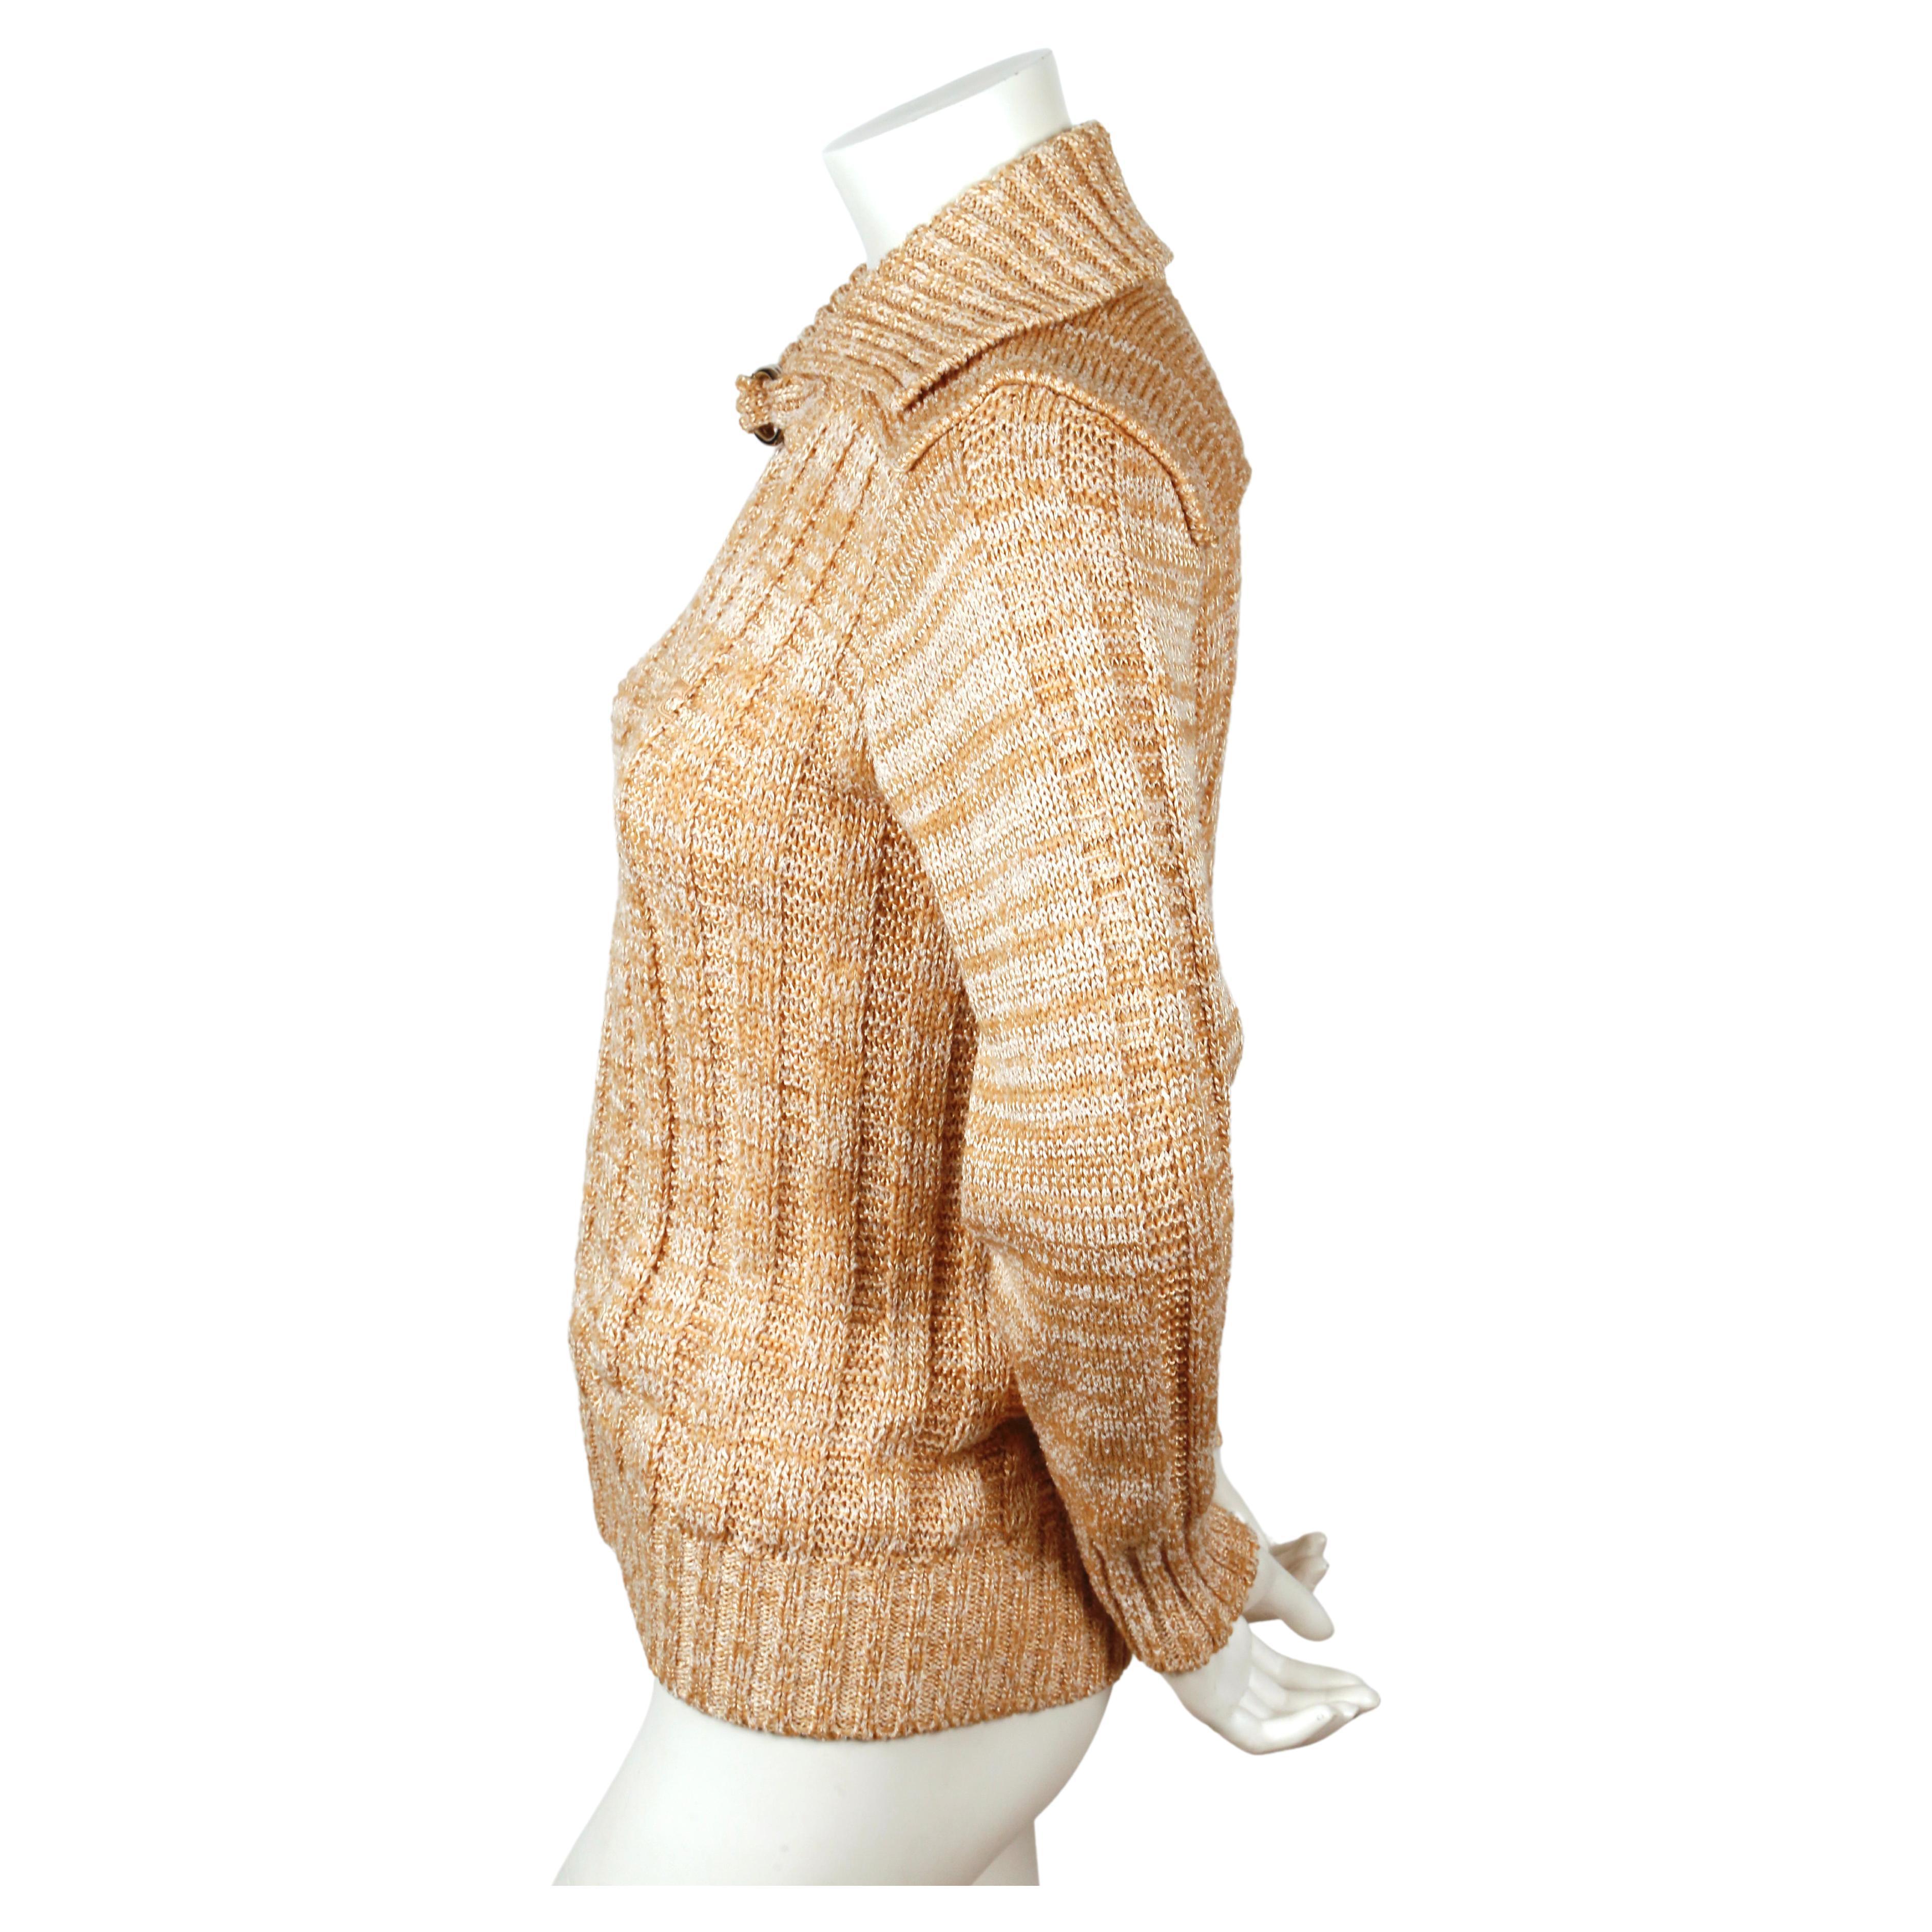 Marled peachy-tan and off-white cardigan sweater with exposed silver zipper, oversized collar with buckle and Courreges logo. Original hang tags are still attached! Labeled a size  0. Best fits a US 2-4. Approximate measurements (un-stretched):